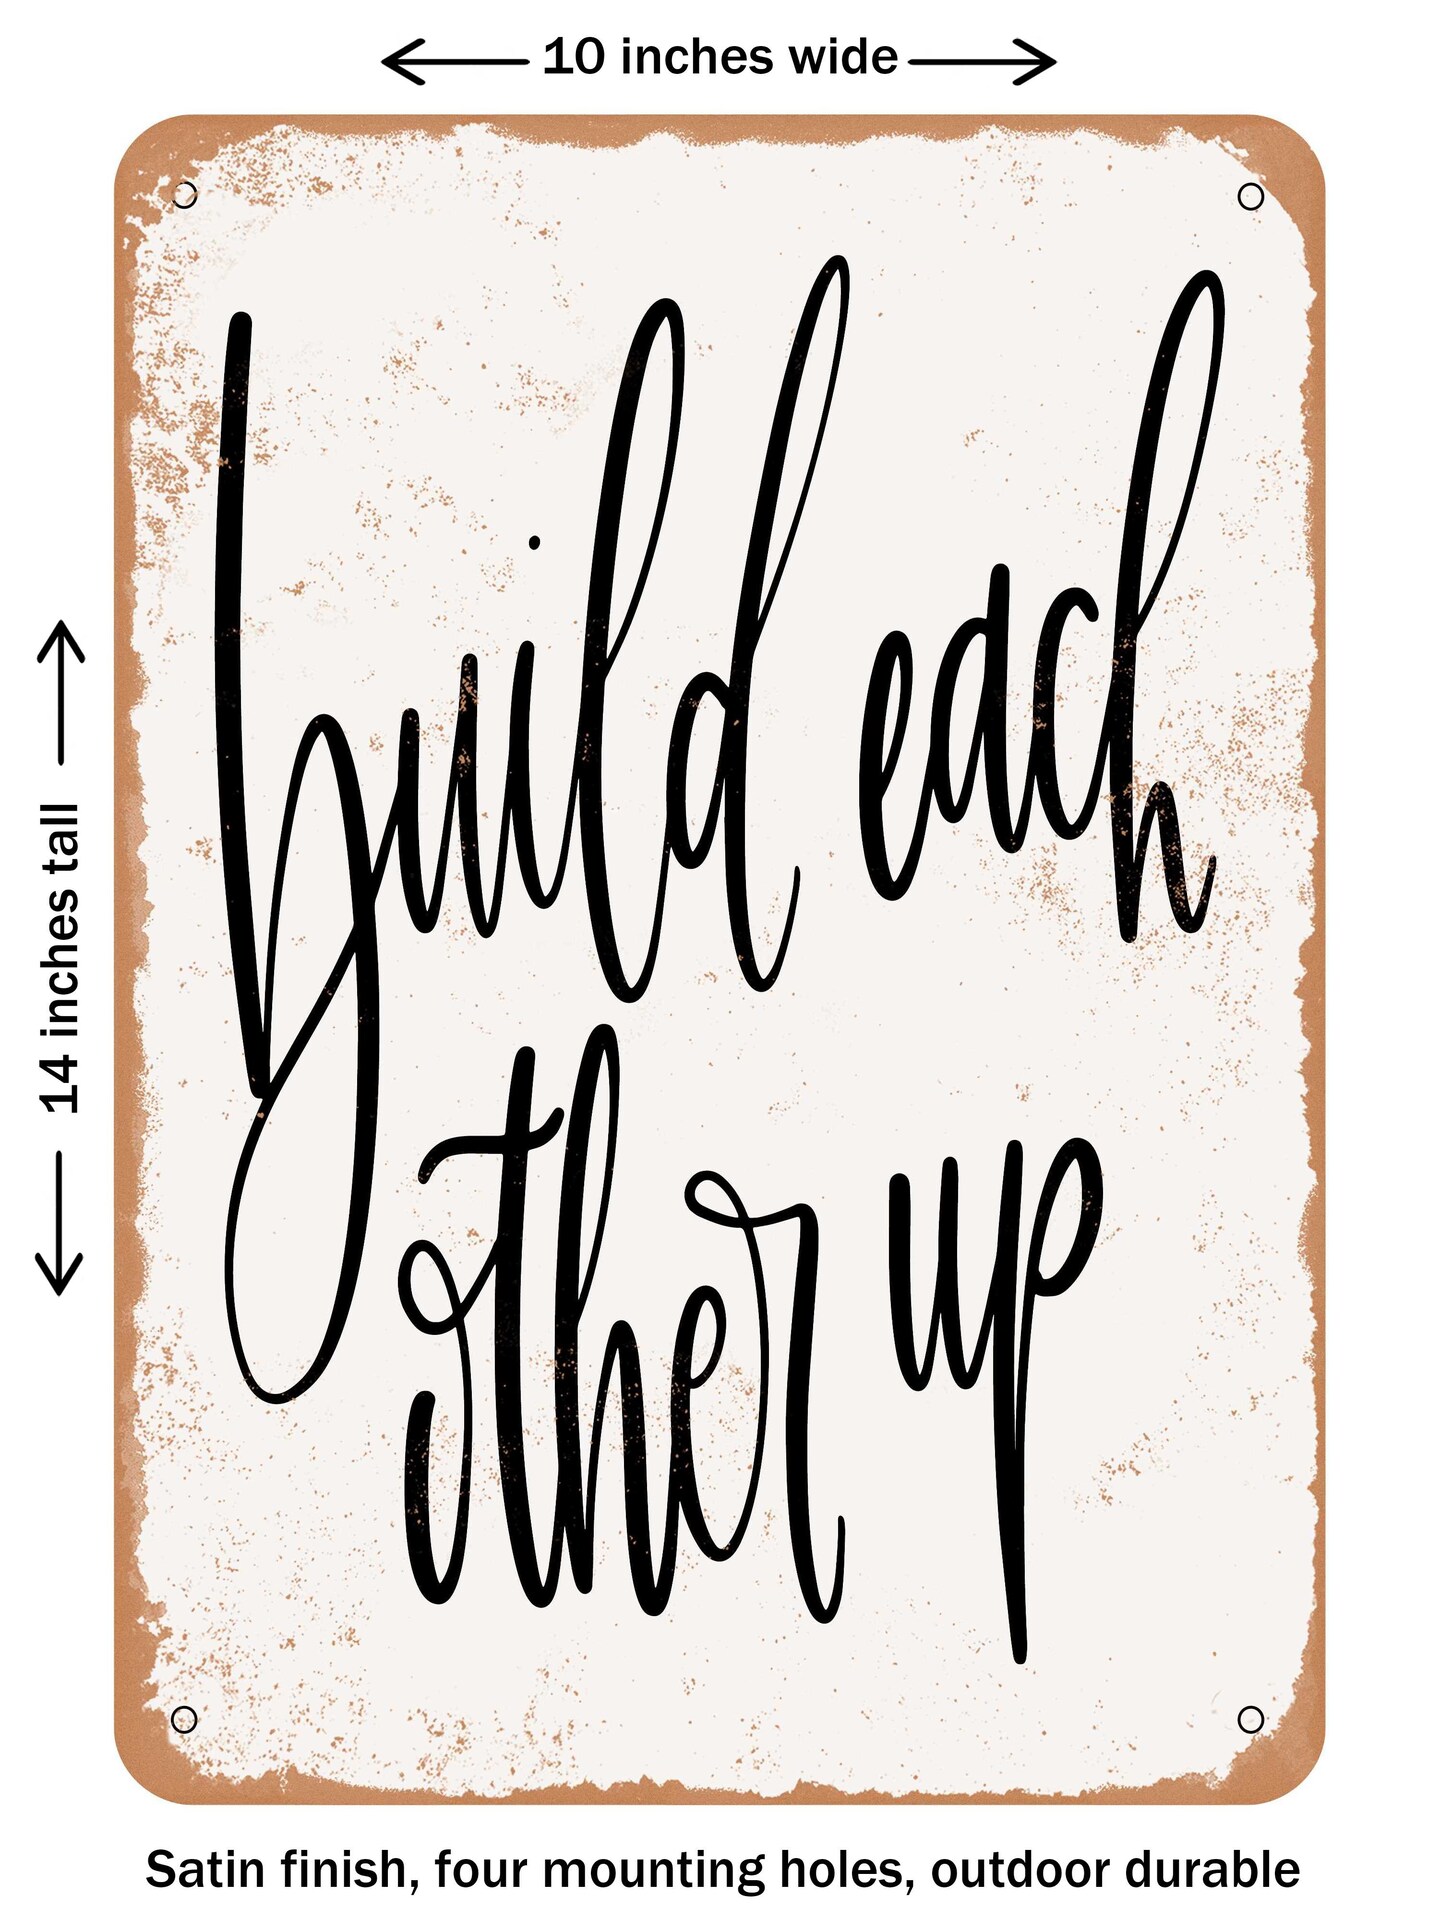 DECORATIVE METAL SIGN - Build Each Other Up  - Vintage Rusty Look